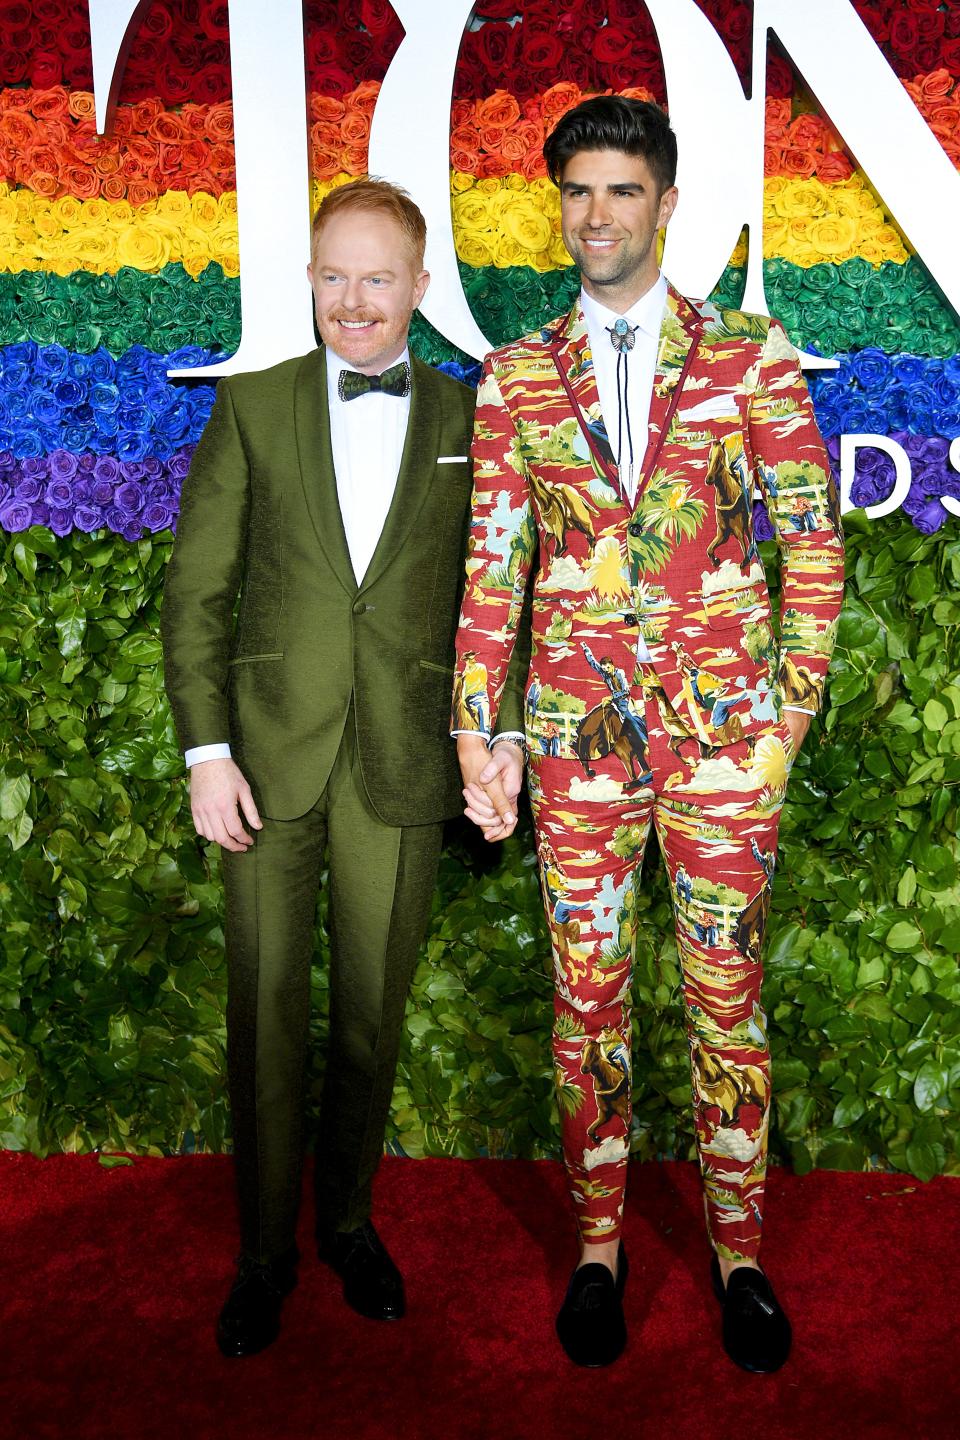 <h1 class="title">Jesse Tyler Ferguson in Richard James and Justin Mikita in David Hart</h1> <cite class="credit">Photo: Getty Images</cite>